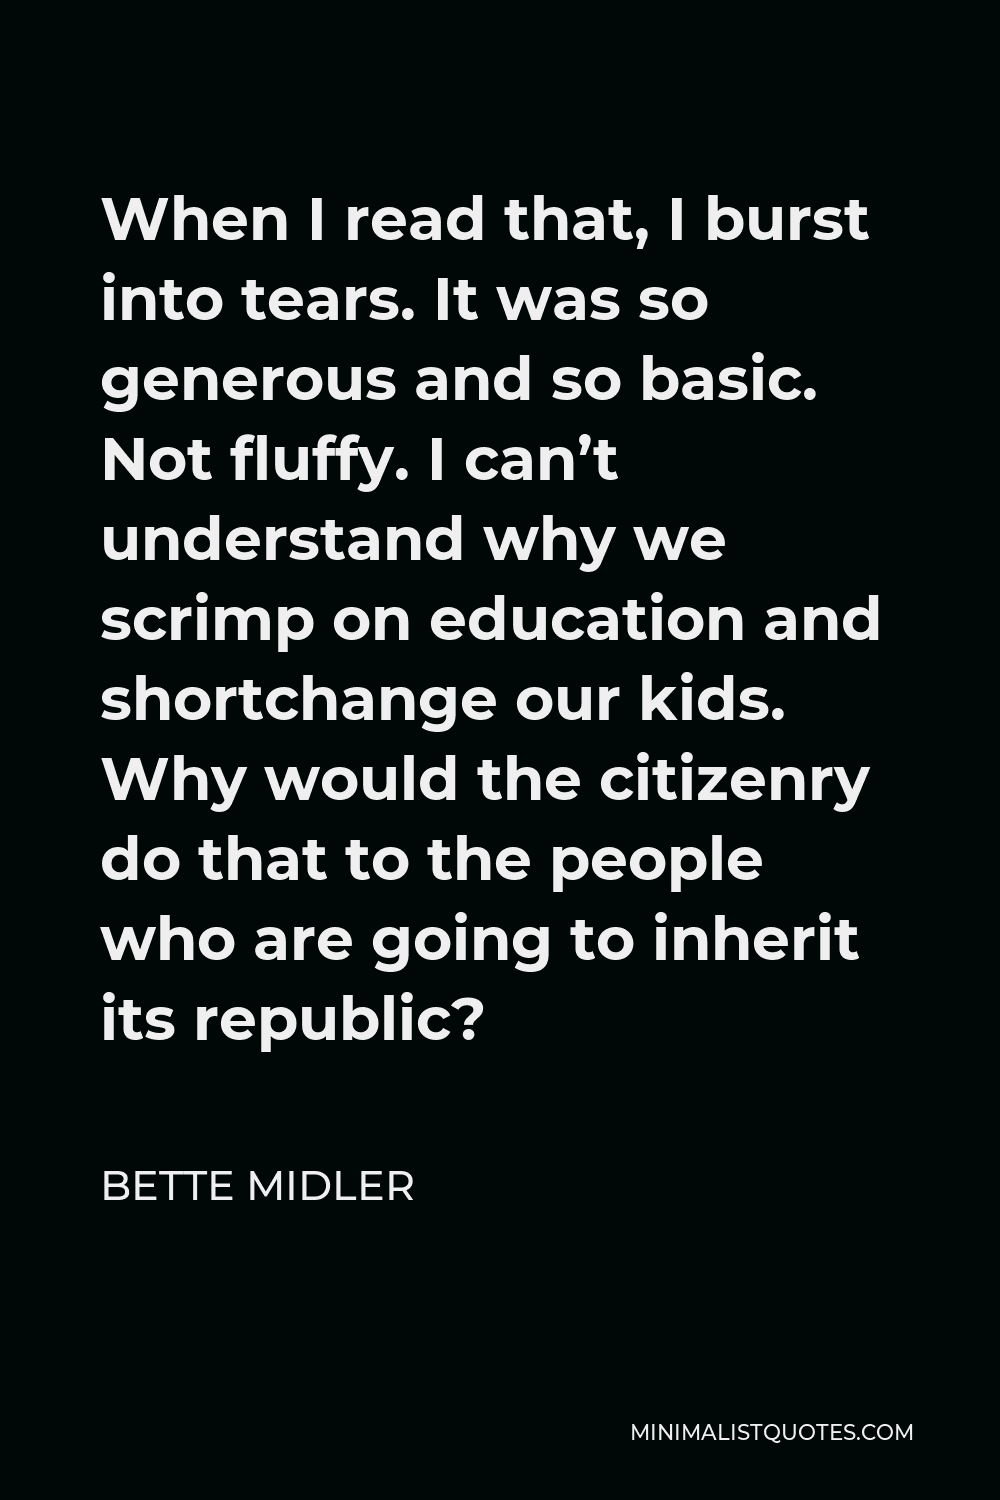 Bette Midler Quote - When I read that, I burst into tears. It was so generous and so basic. Not fluffy. I can’t understand why we scrimp on education and shortchange our kids. Why would the citizenry do that to the people who are going to inherit its republic?